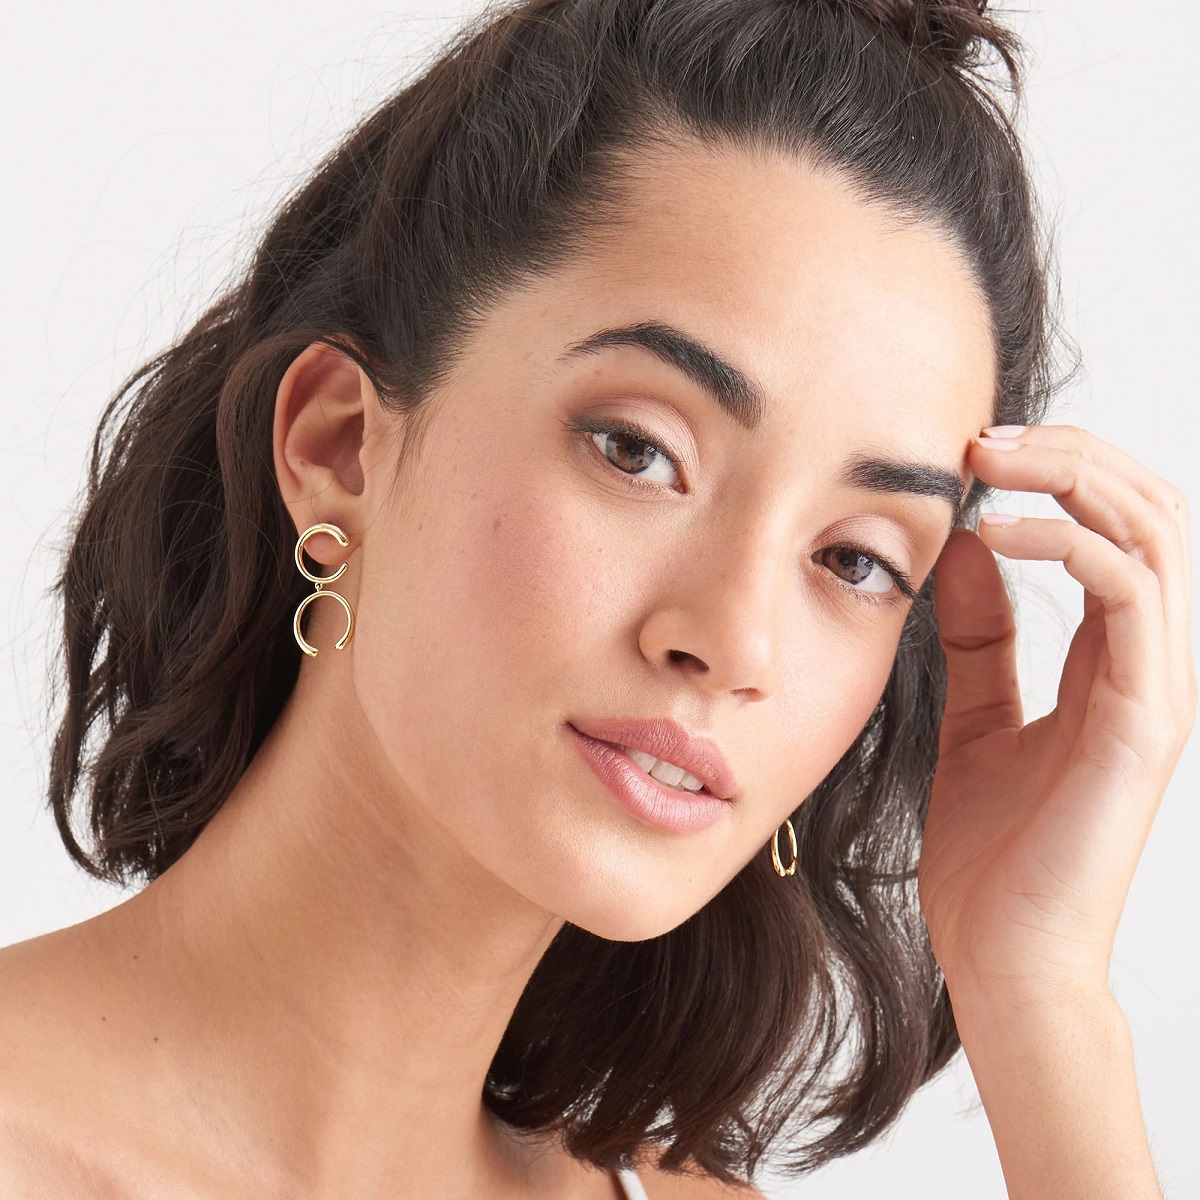 Ania Haie Gold Luxe Double Curve Earrings